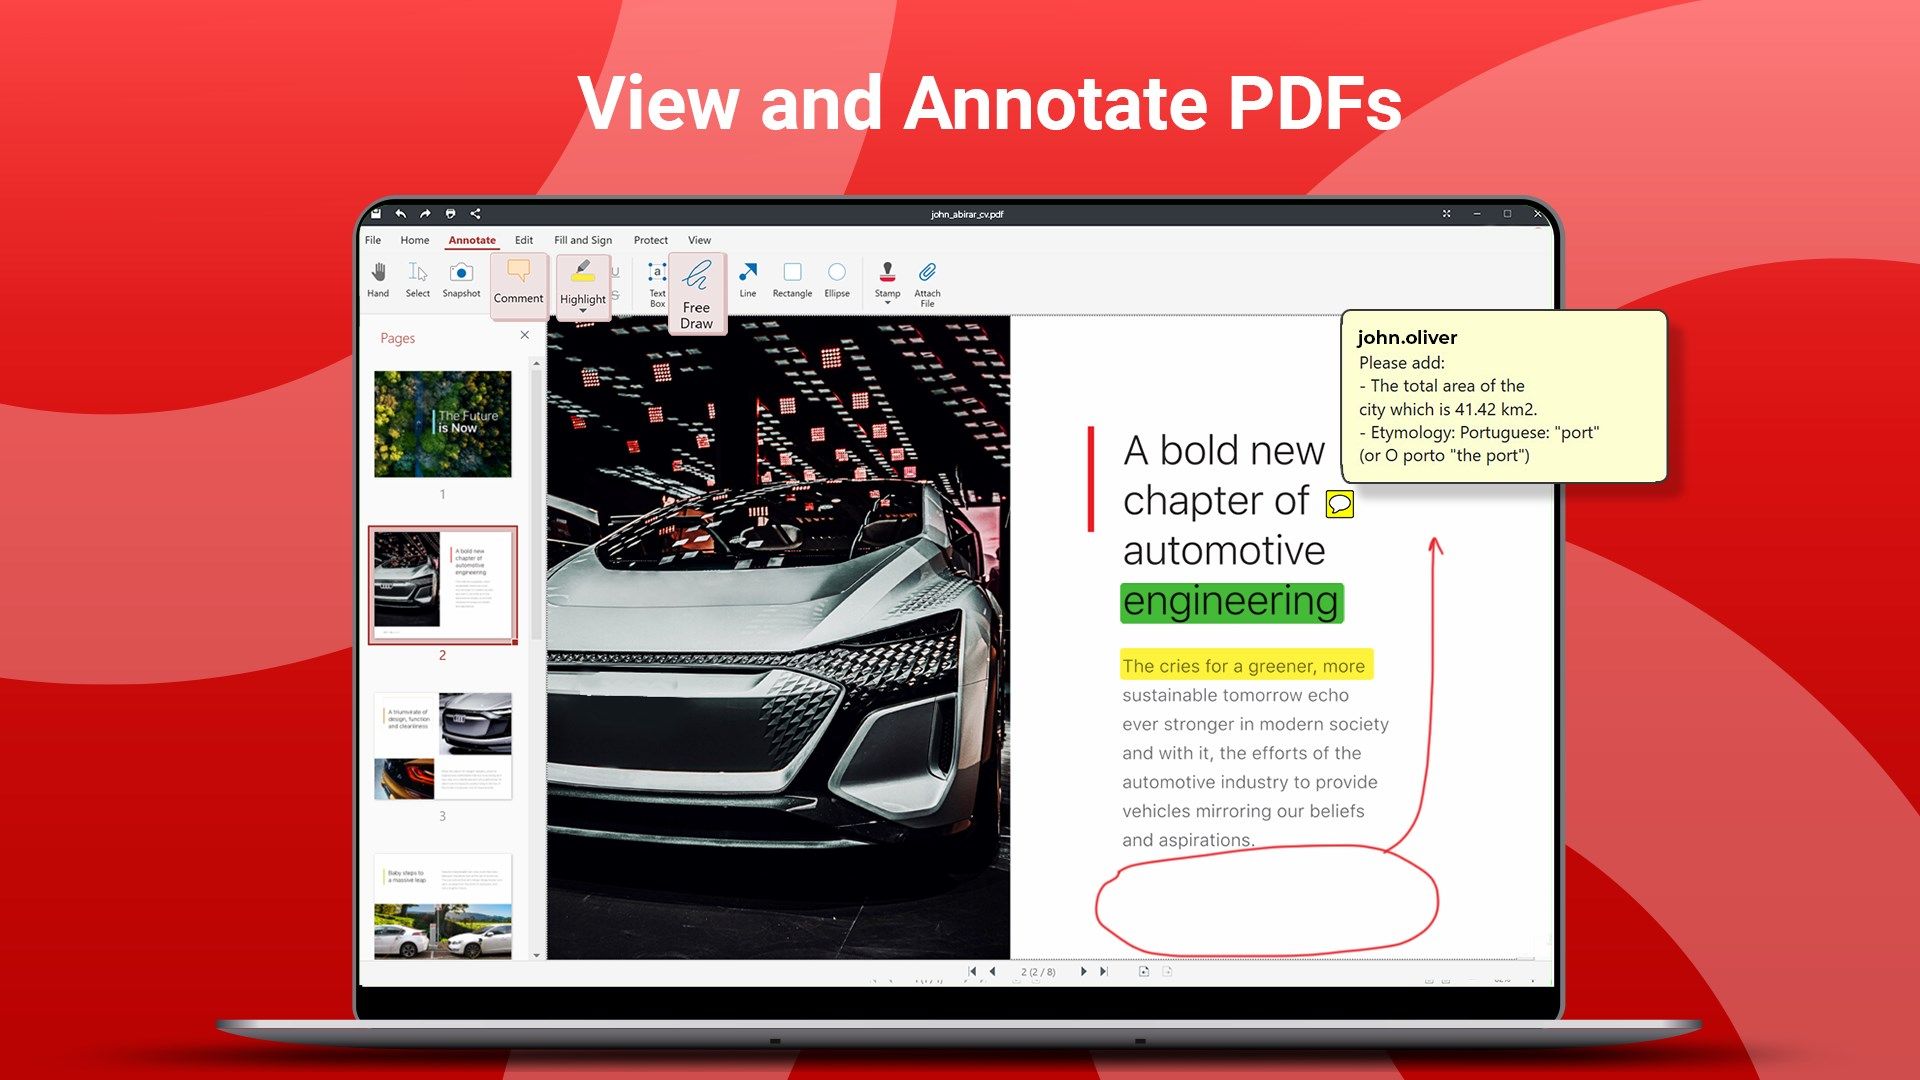 Finetune images and other elements to make your PDF clear and stylish. Add, resize, arrange, or rotate any local image & insert pictures from the web. Adjust any element in your PDF - from shapes to drawings and everything in between.